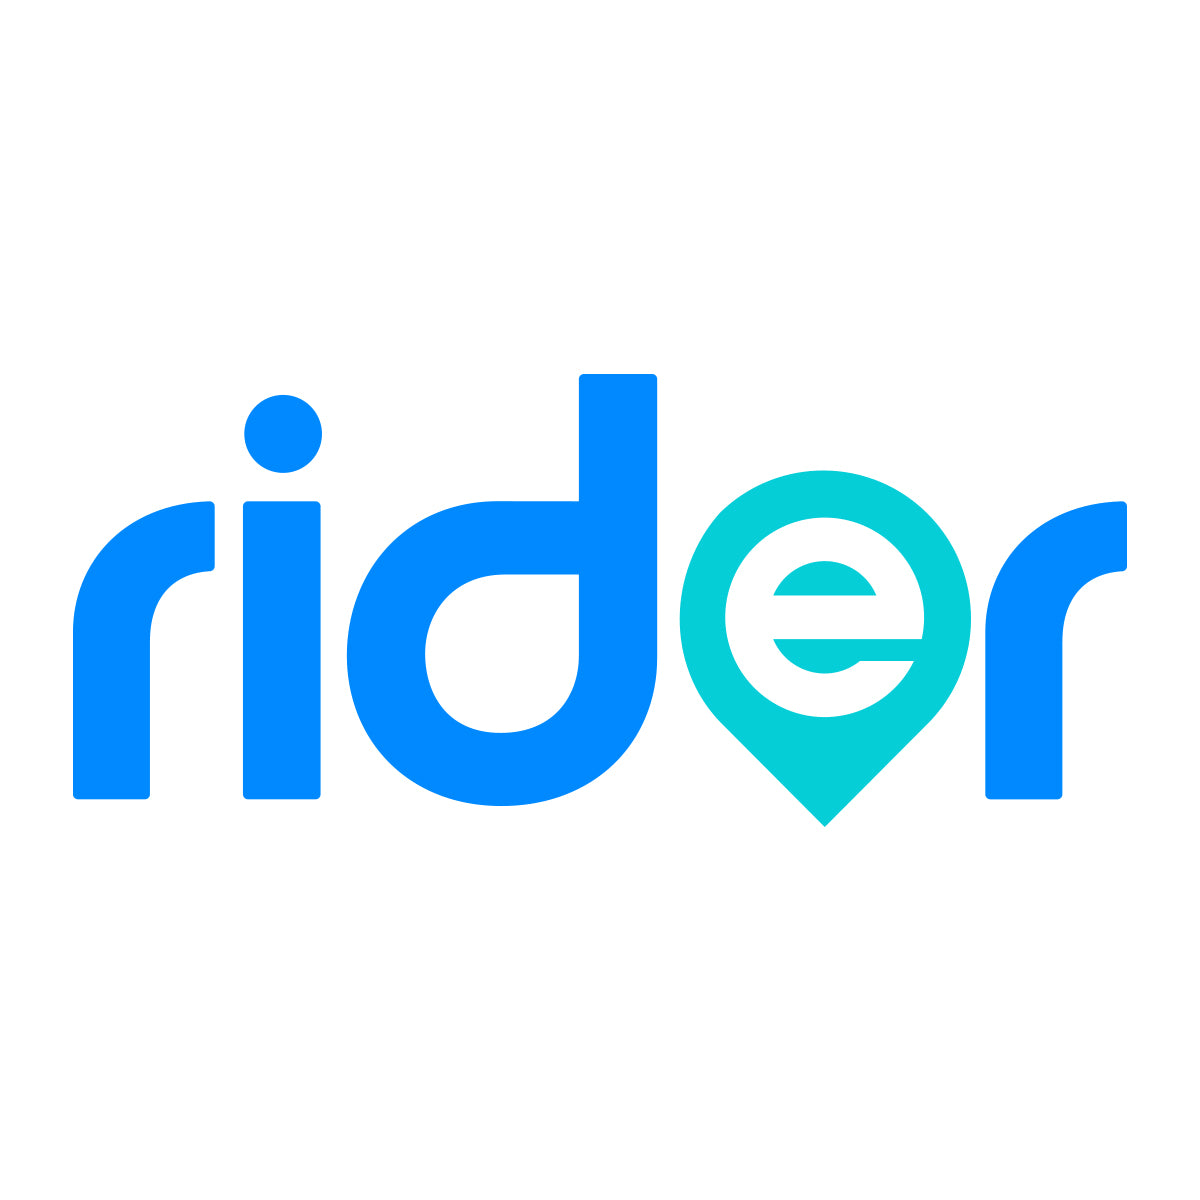 Hire Shopify Experts to integrate Rider Logistics app into a Shopify store